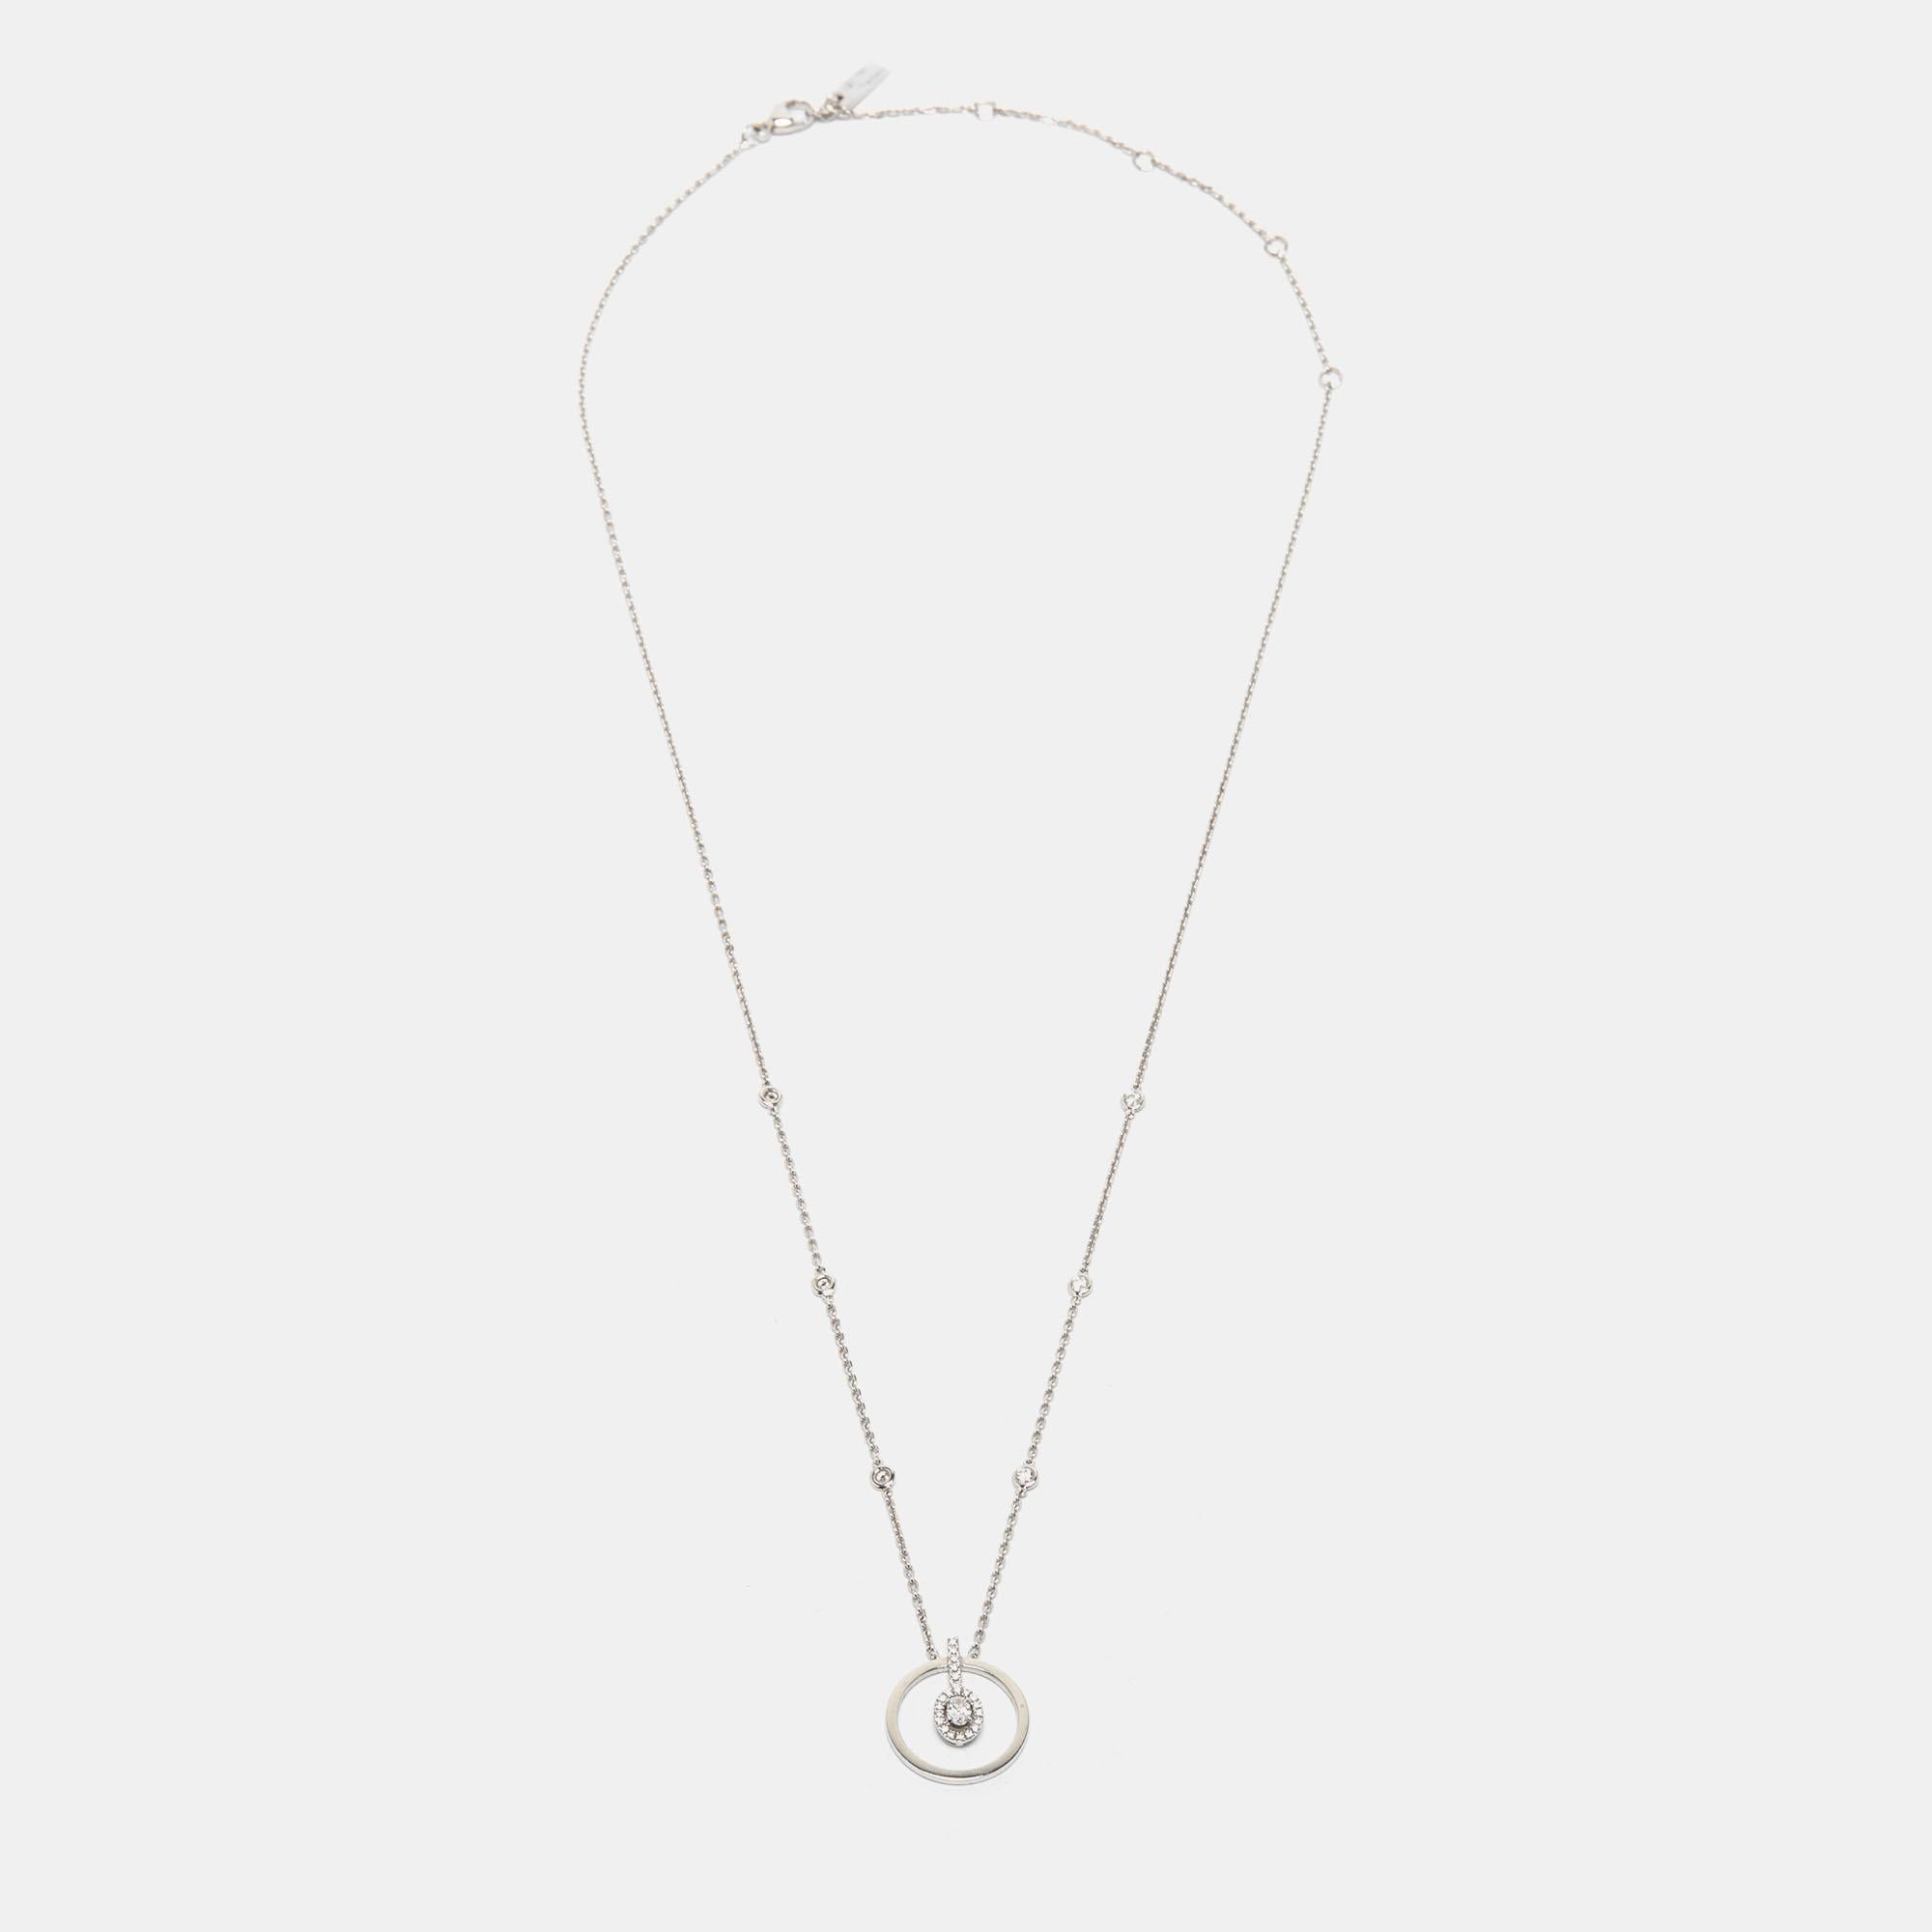 The fine workmanship, use of precious metals, and unique appeal make this designer necklace for women a fabulous purchase. It's a worthy investment.

Includes: Info Booklet, Original Case, Authenticity Card
